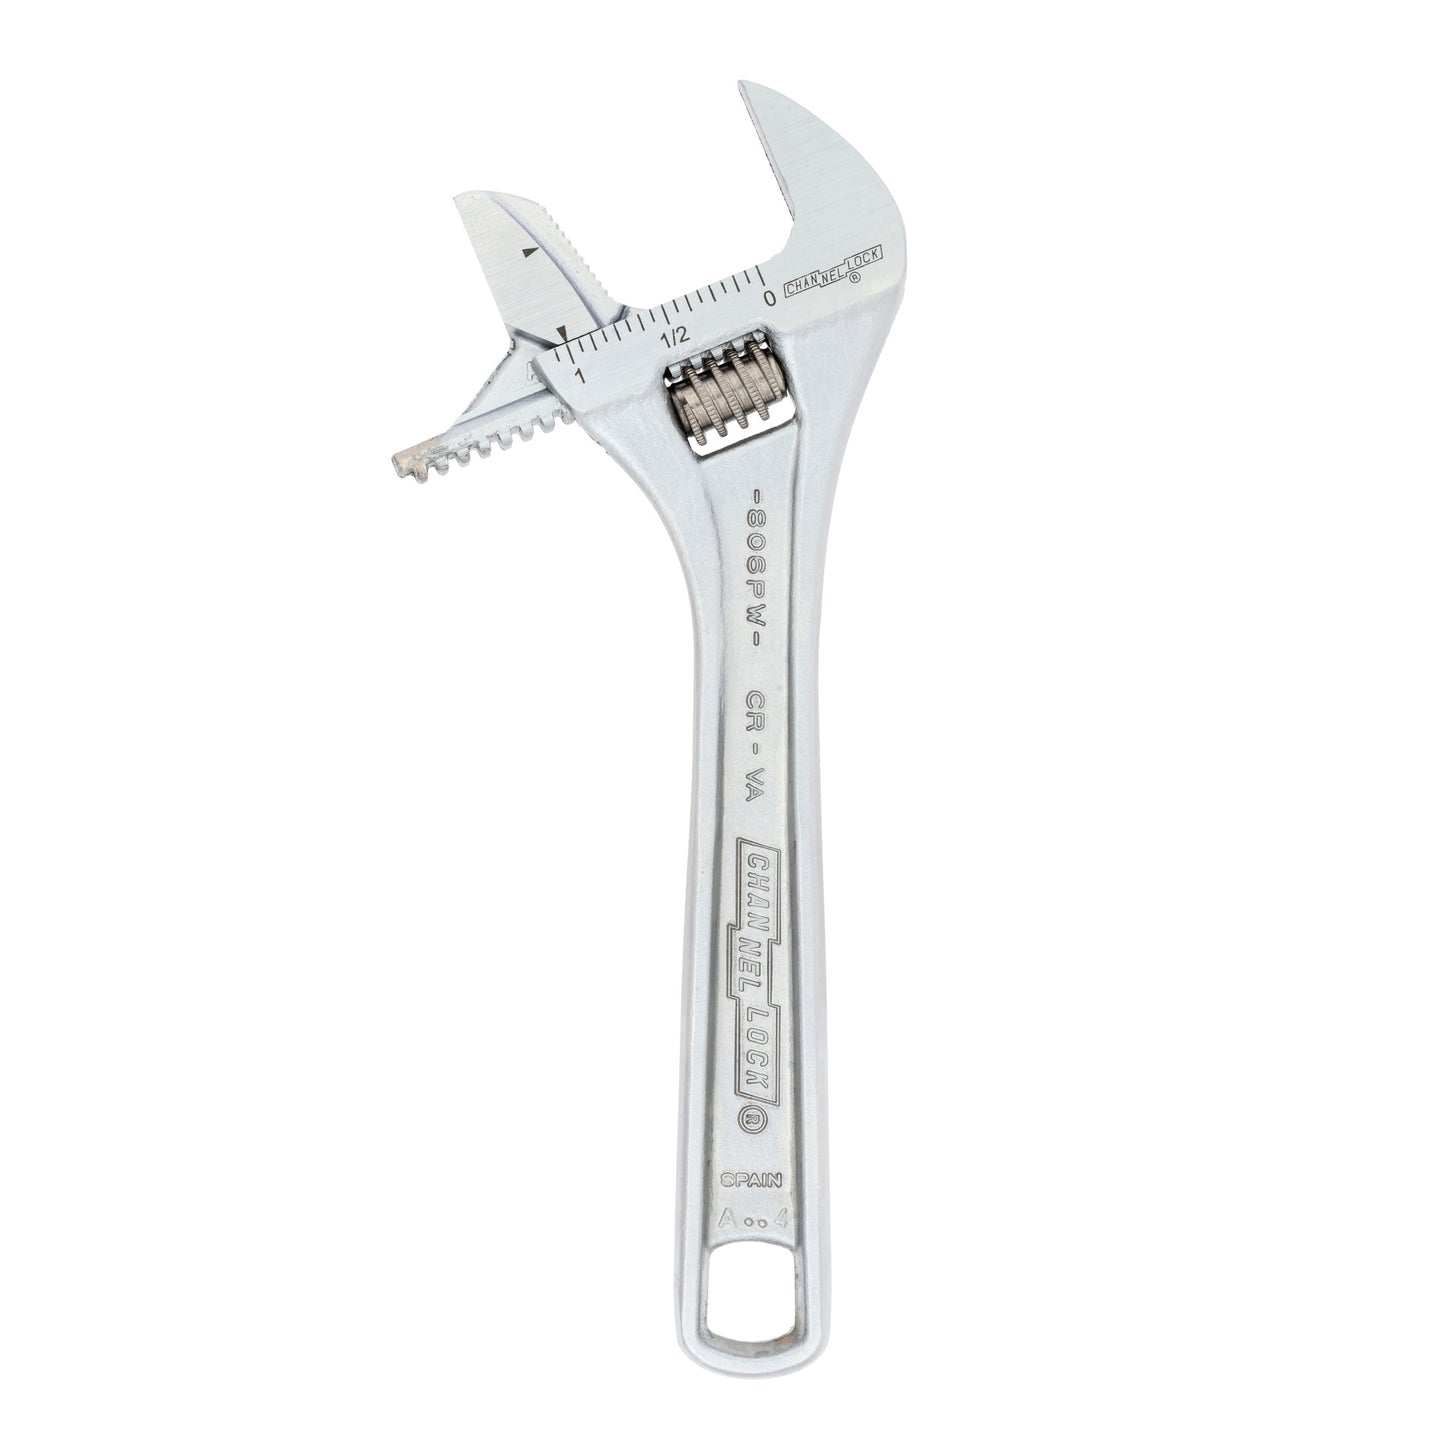 6-inch Reversible Jaw Adjustable Wrench (806PW)